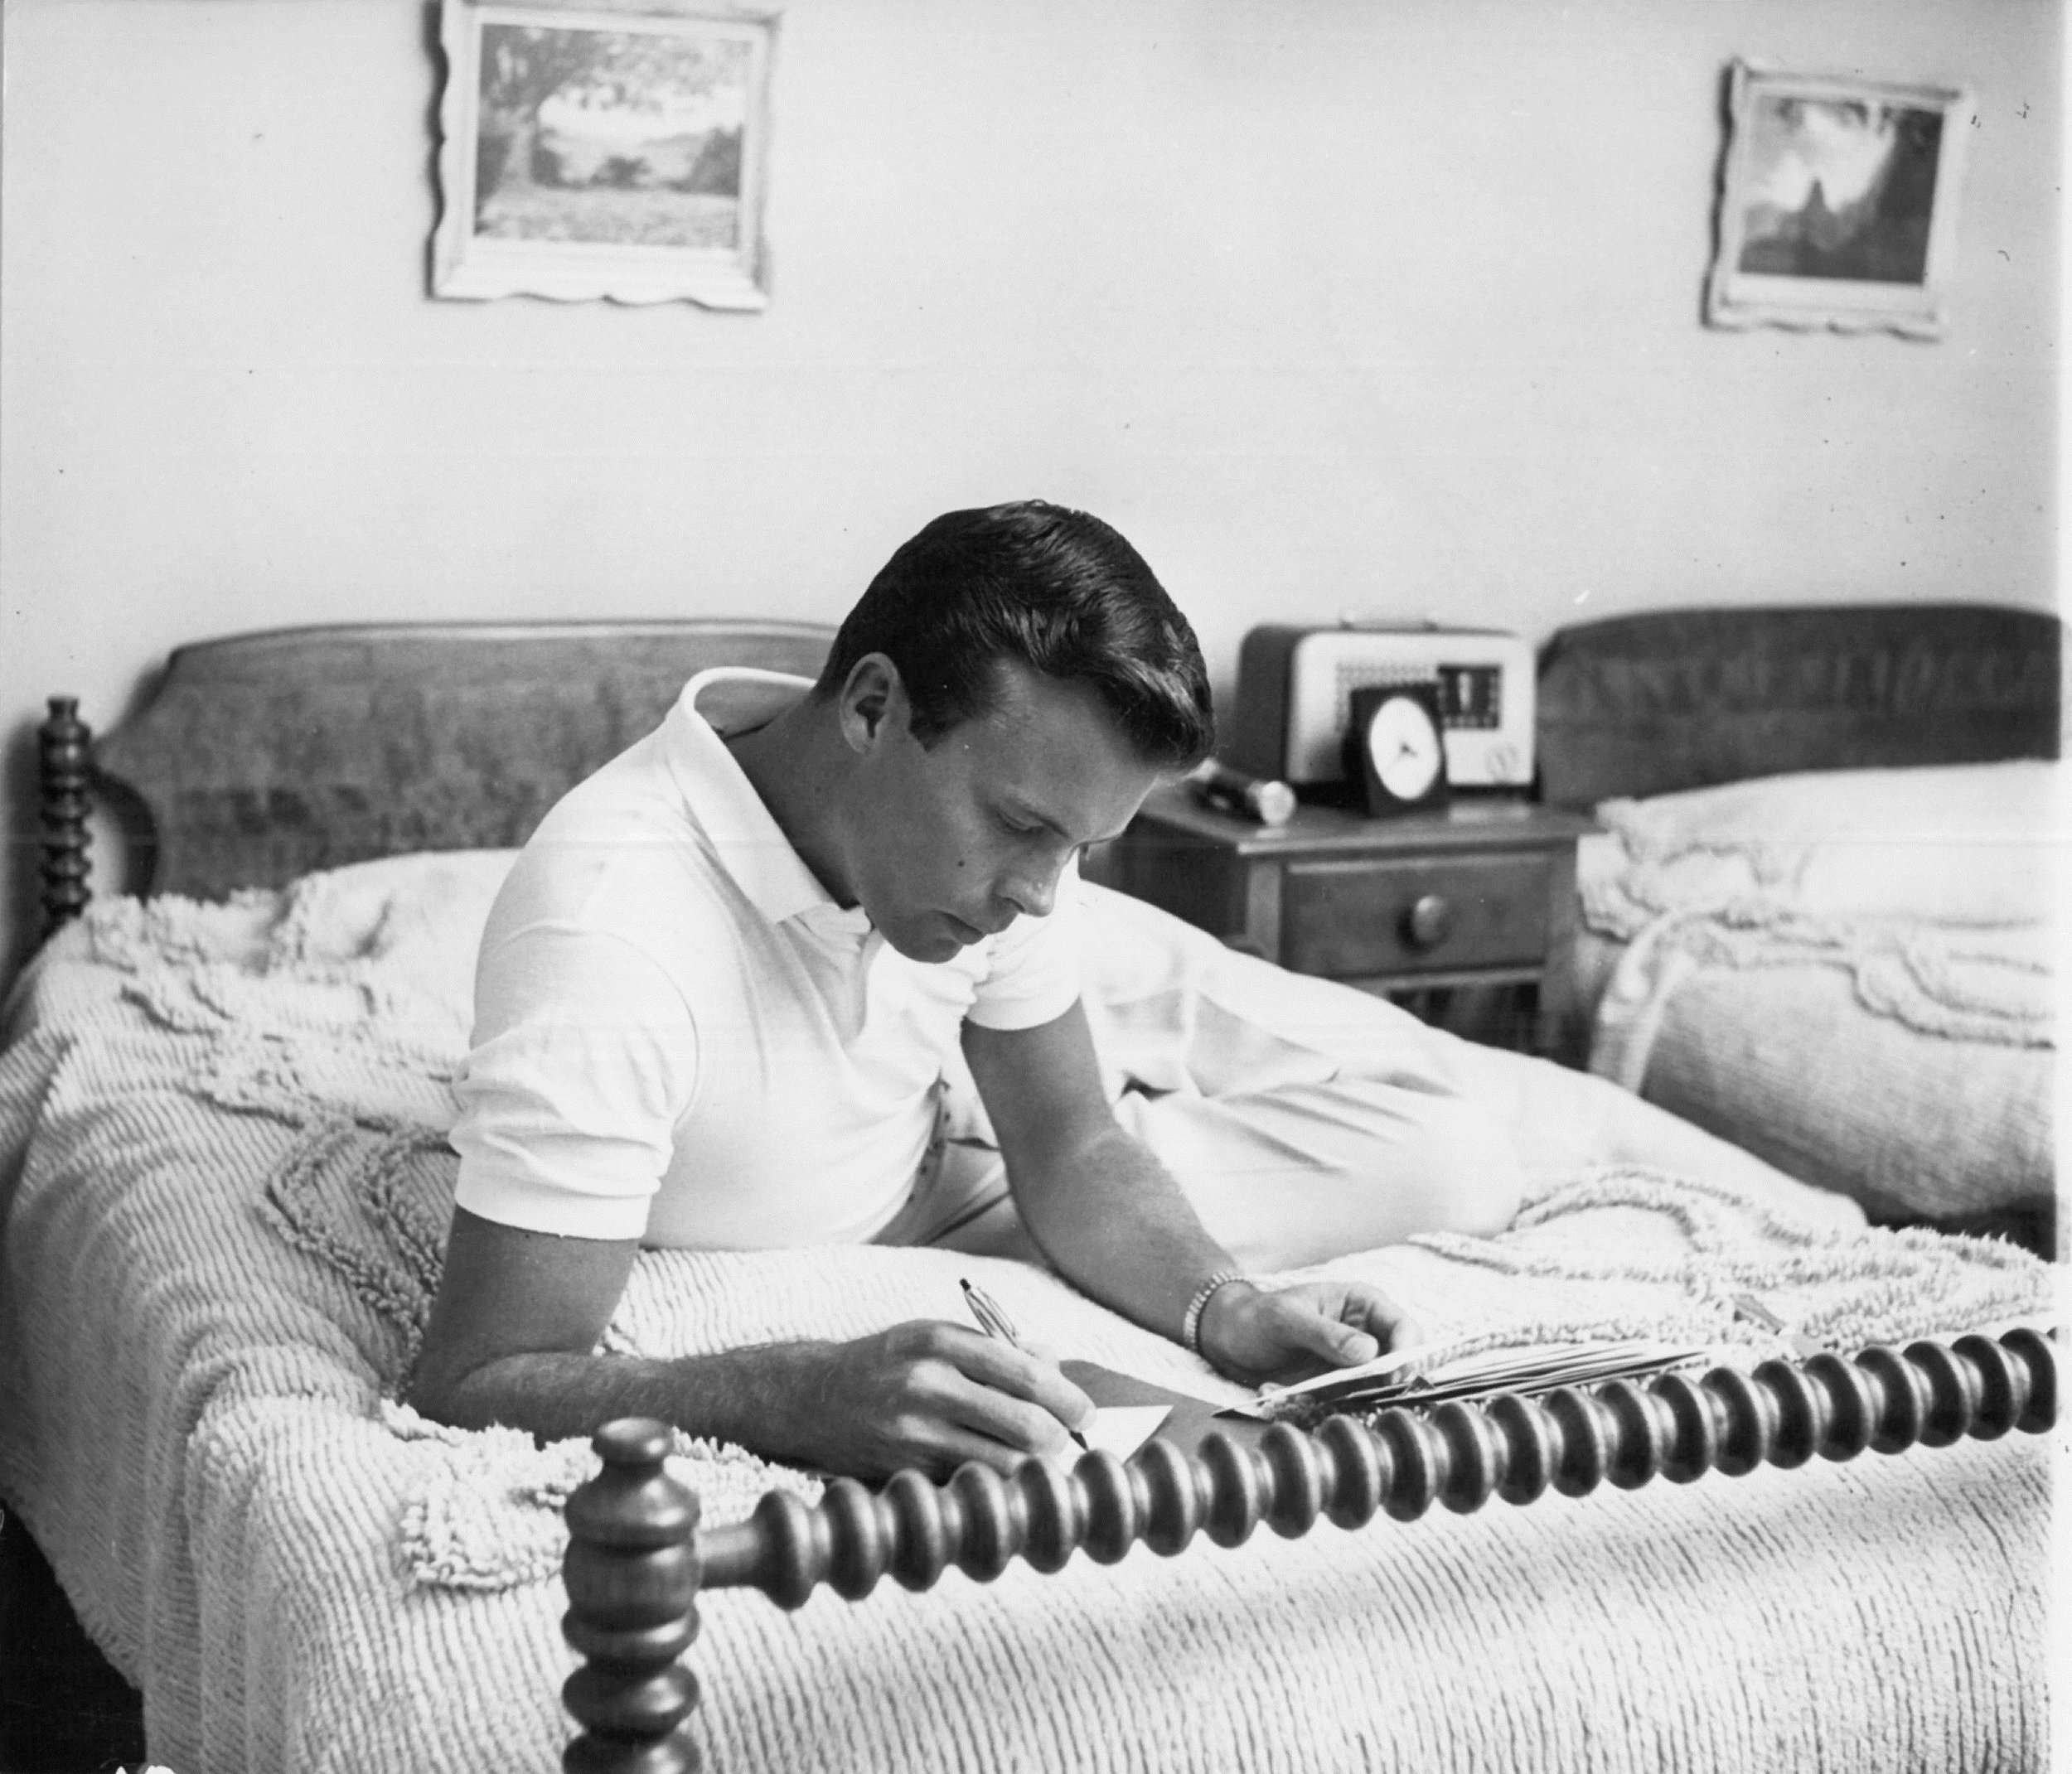  Bob in his bedroom, c. Jan 1955?  Don Ornitz of Globe Photos, New York City, made this photo and several others in which Bob wears these trousers and a plain Lacoste tennis shirt with a crocodile logo embroidered on the chest. 